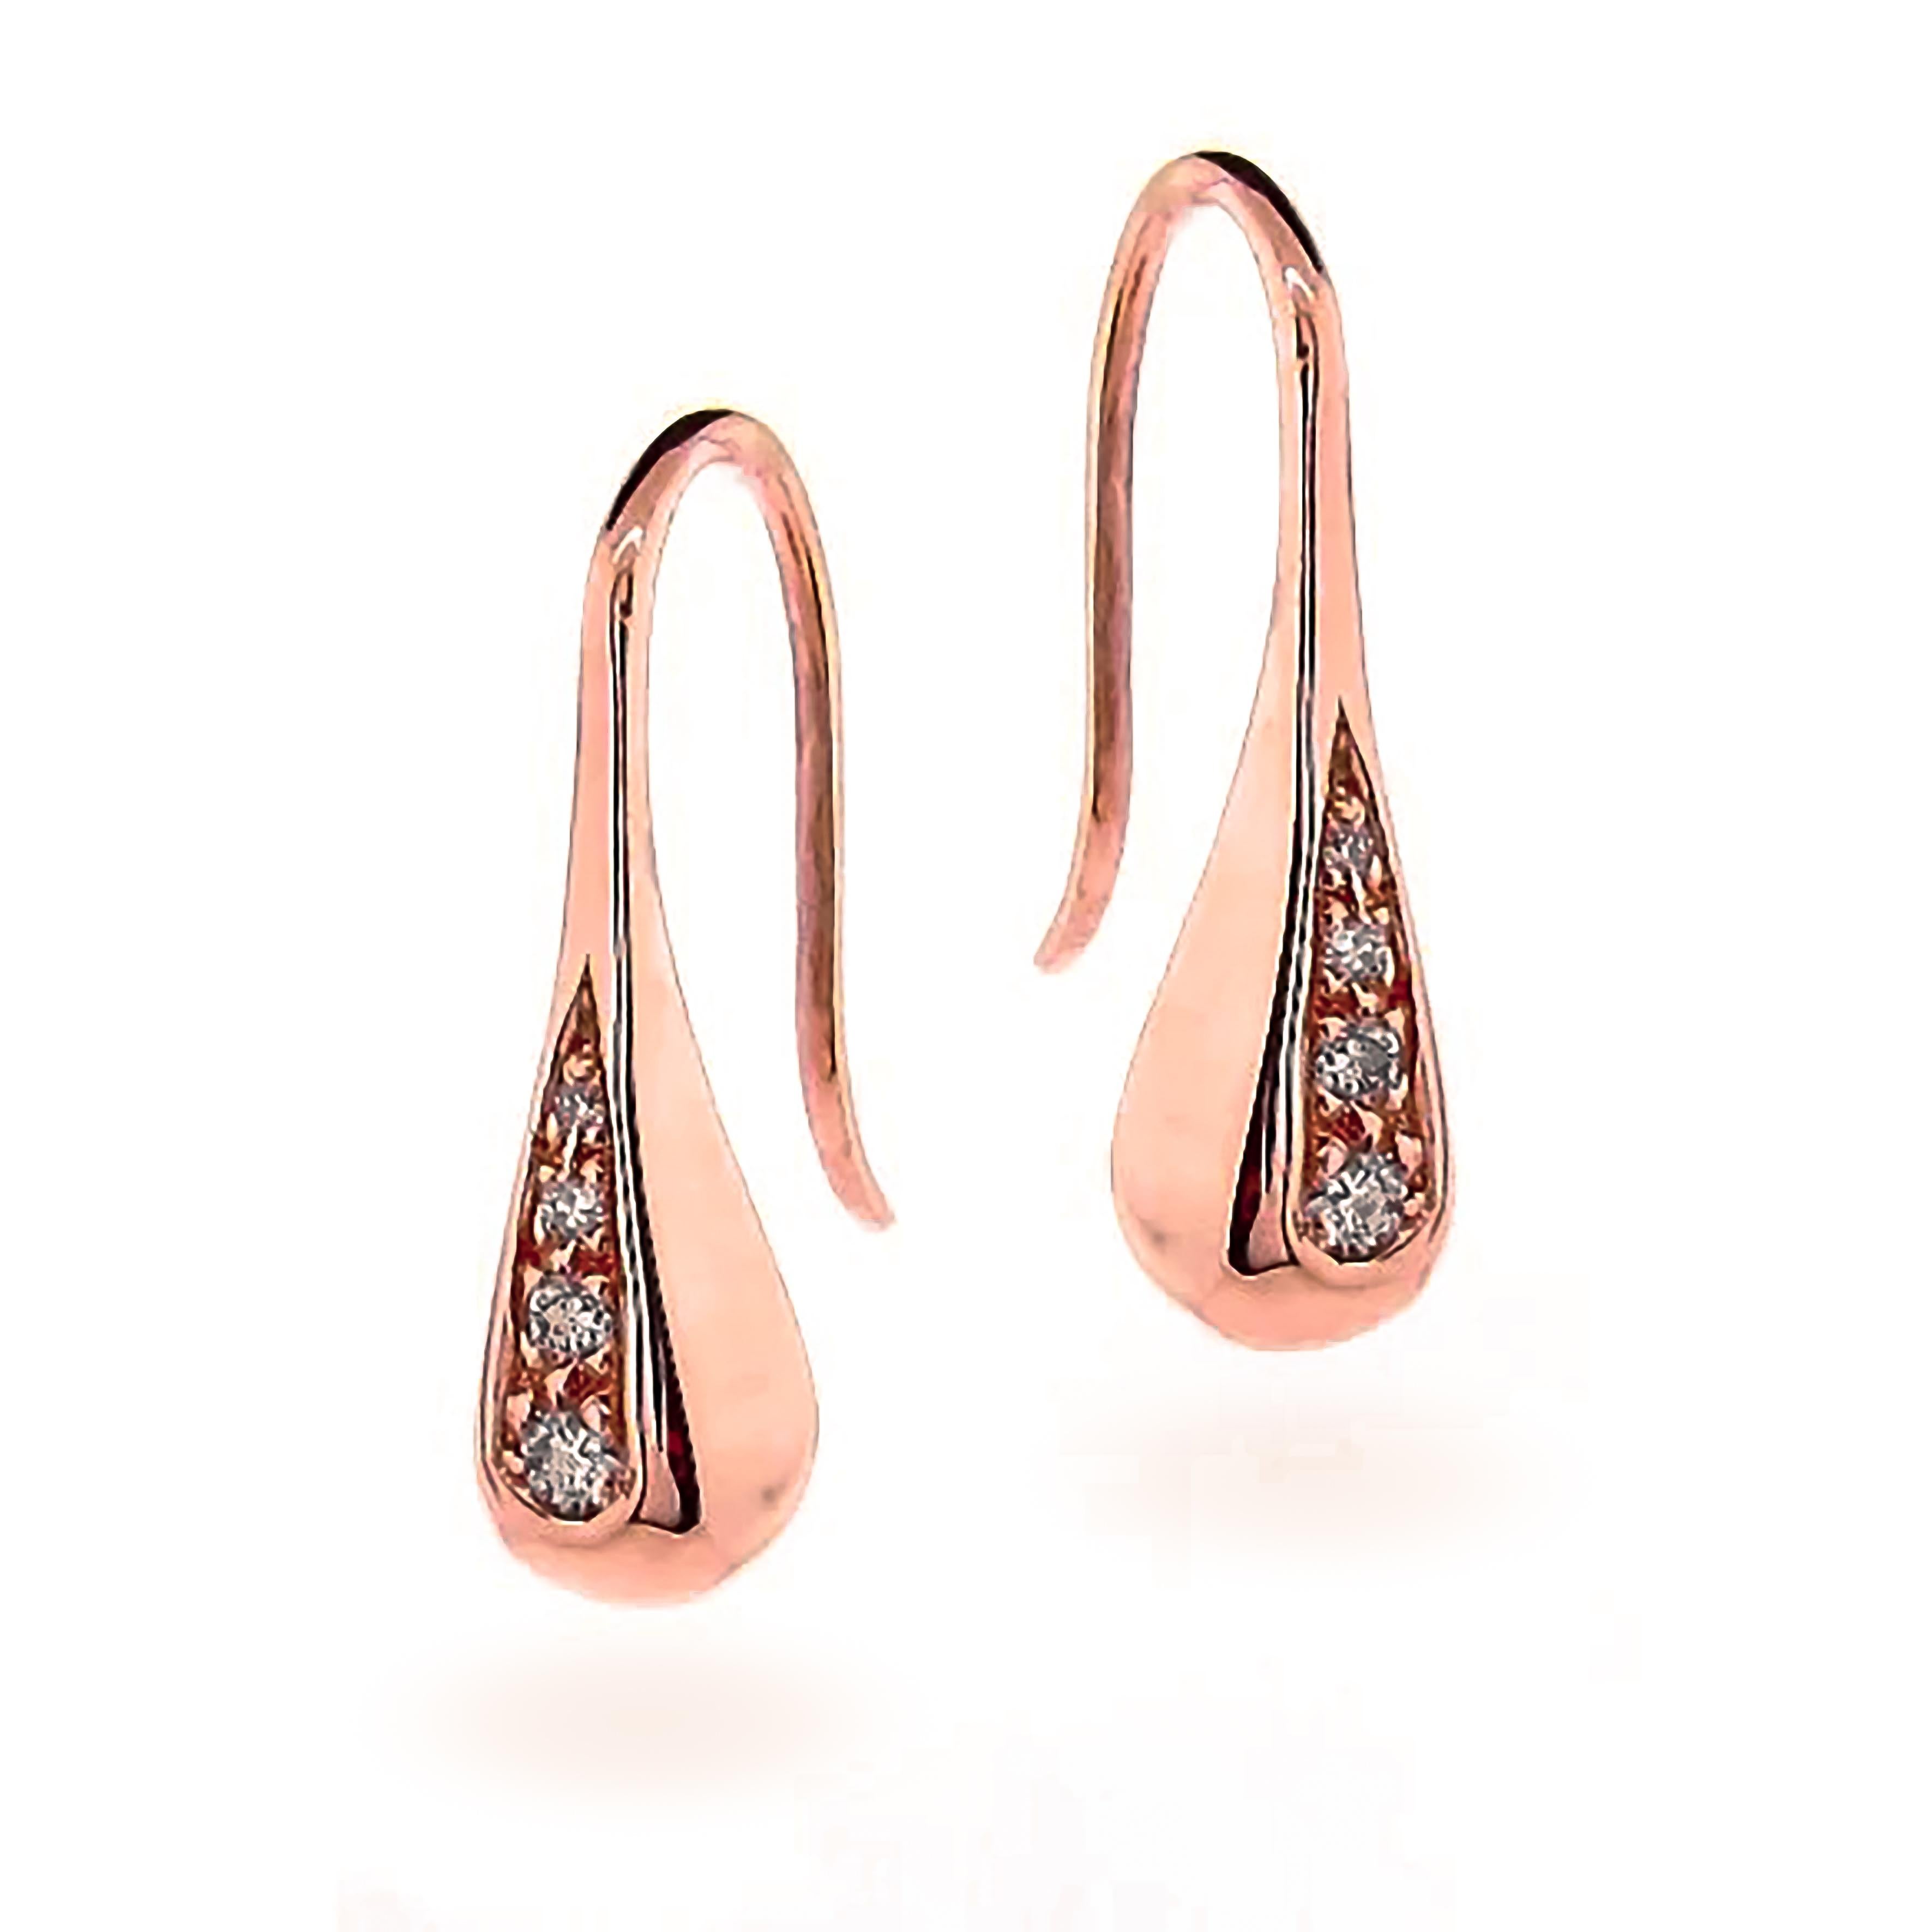 Add a touch of elegance to your wardrobe with these stunning 9 karat solid rose gold diamond droplet earrings. These simple yet sophisticated statement earrings are perfect for both everyday work wear and special occasions.

The earrings feature a